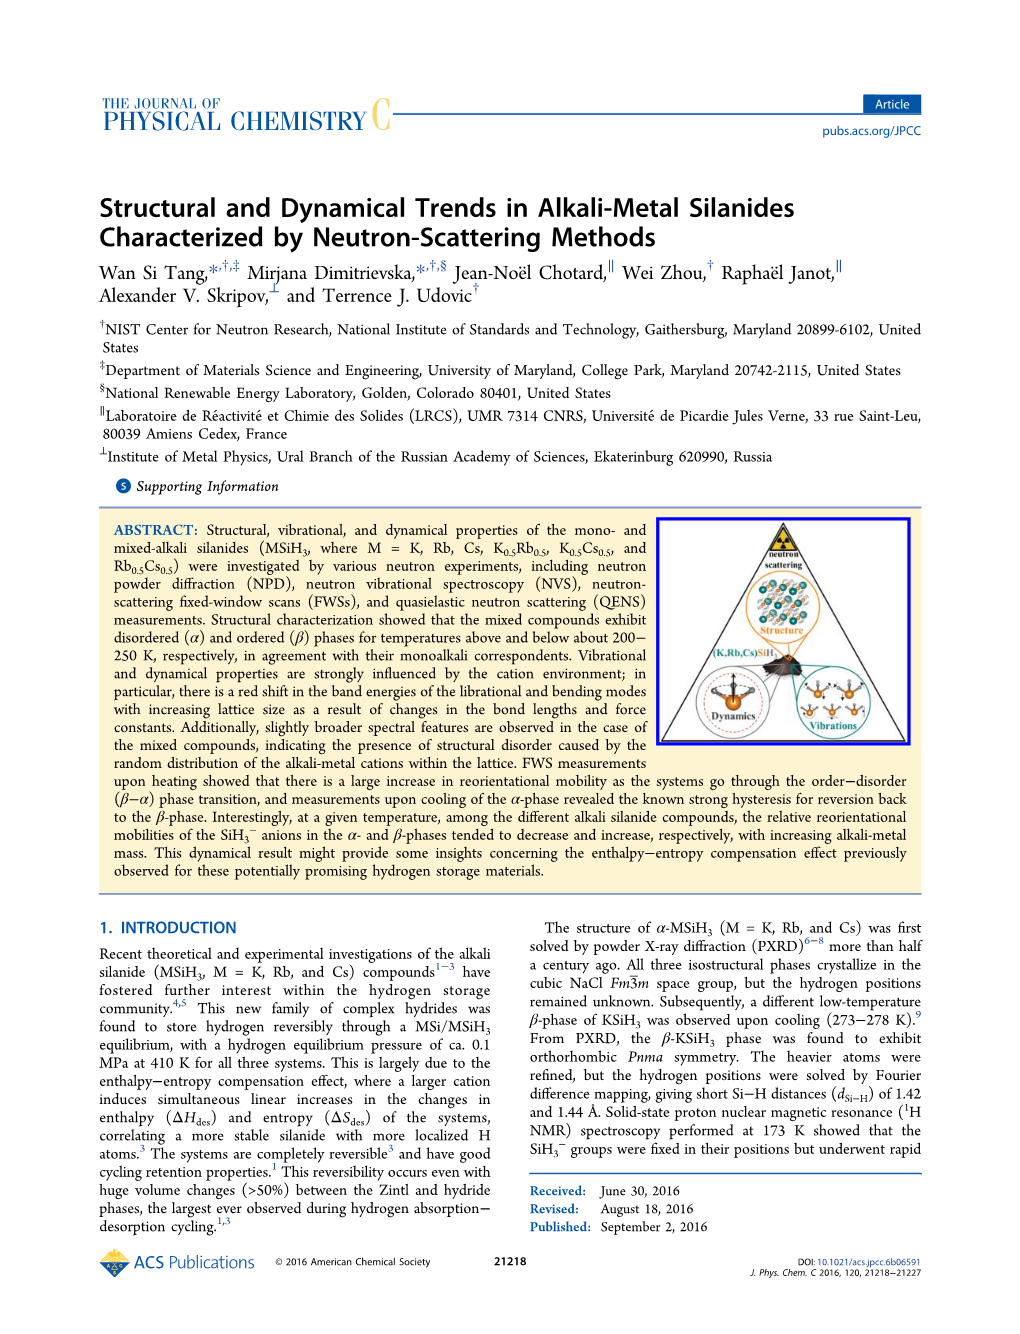 Structural and Dynamical Trends in Alkali-Metal